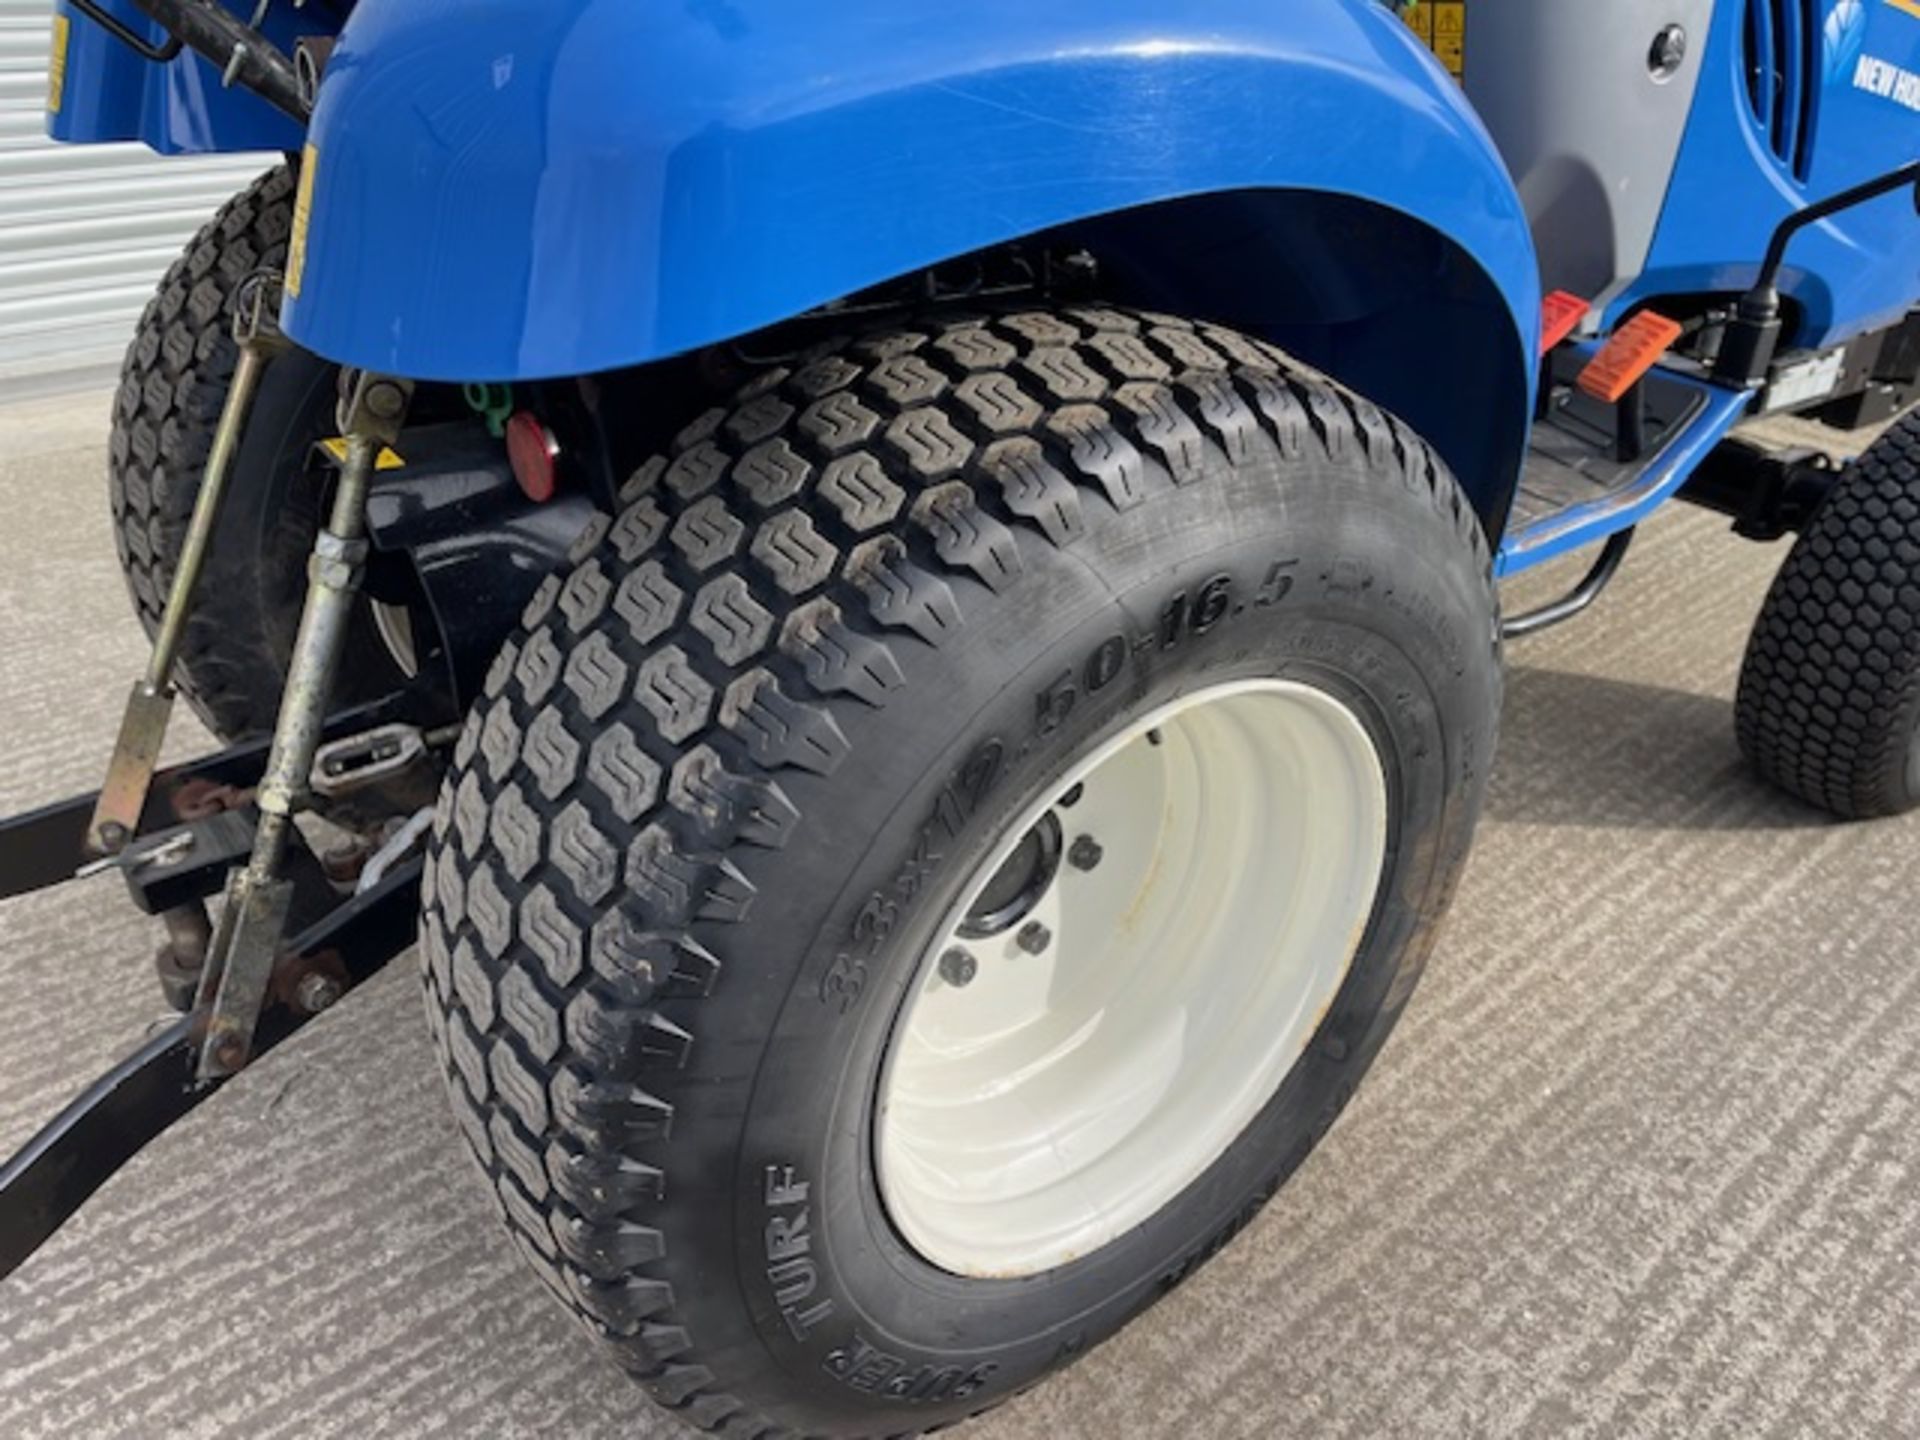 2019, NEW HOLLAND BOOMER 25 COMPACT TRACTOR - Image 11 of 11